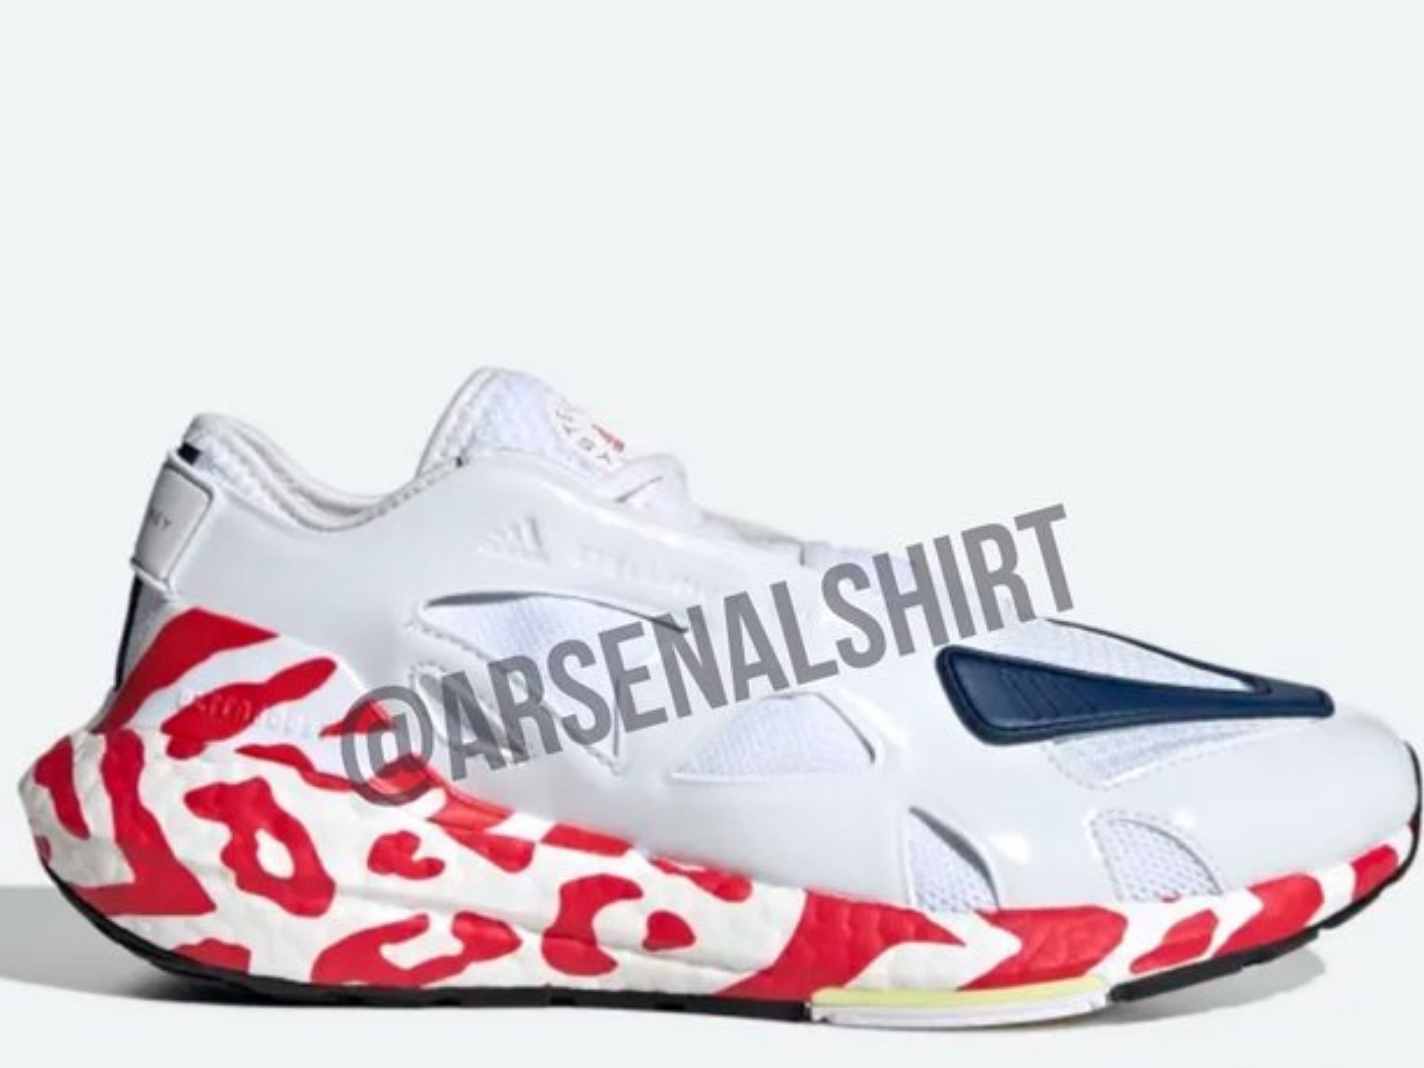 First look at the new sneakers from Arsenal x Stella McCartney Collection